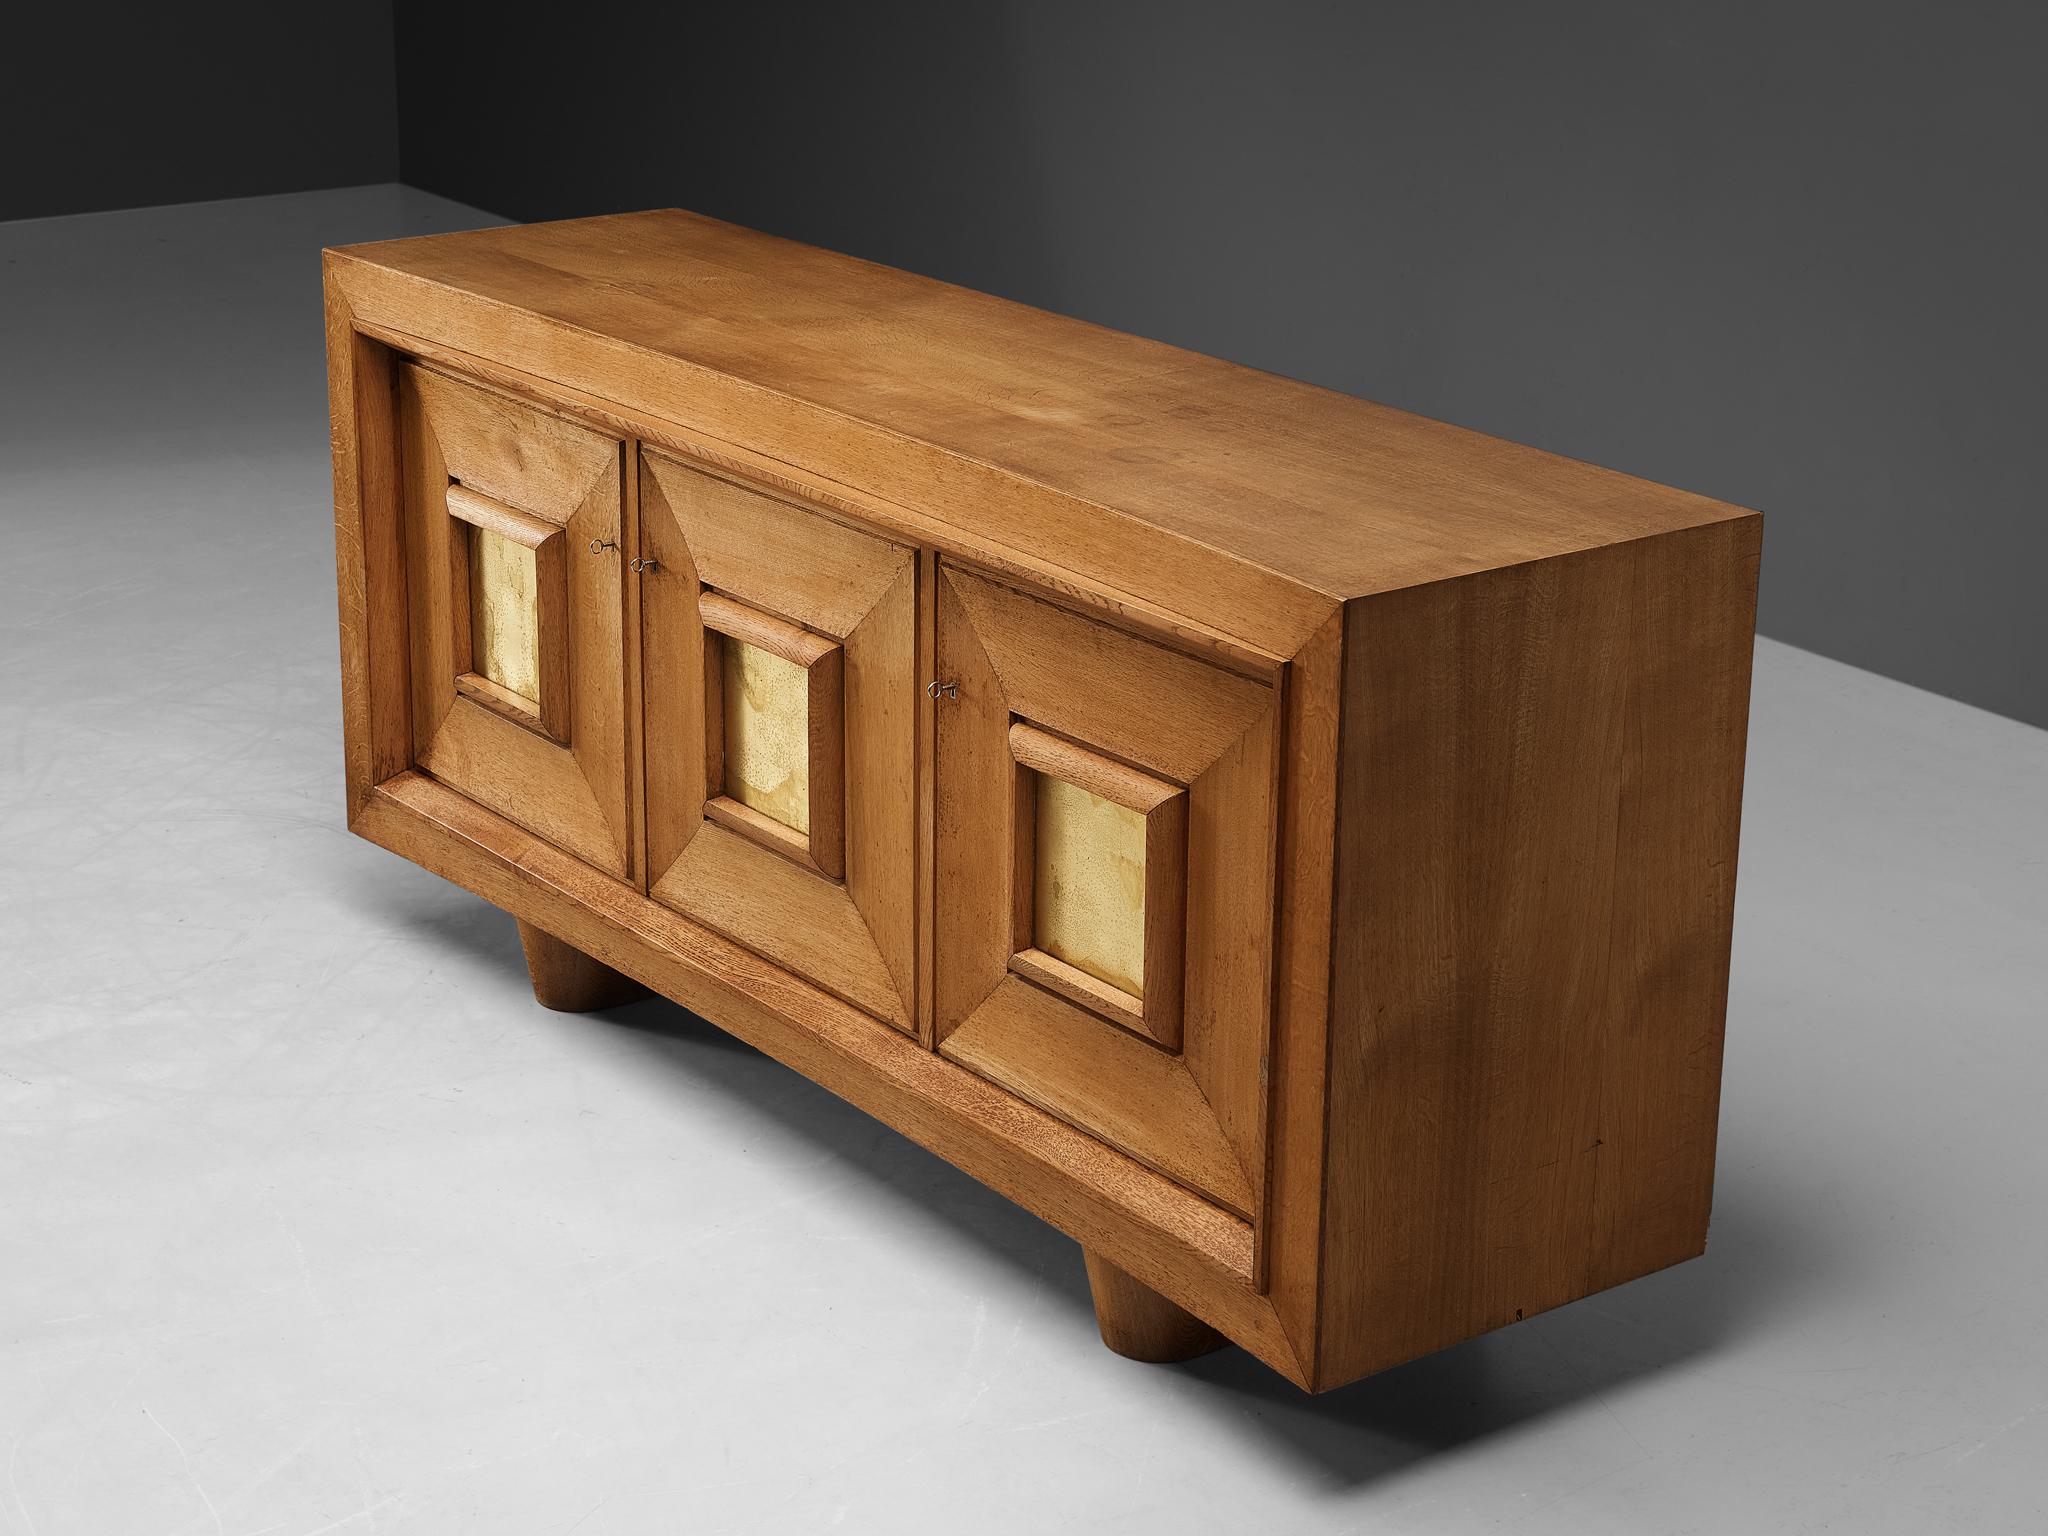 Jorj Rual, sideboard, oak, gold leaf, France, 1930s.

This utterly well-balanced sideboard is characterized by a rectangular shape, featuring strong vertical and horizontal lines and provides plenty of storage space. The design is executed in